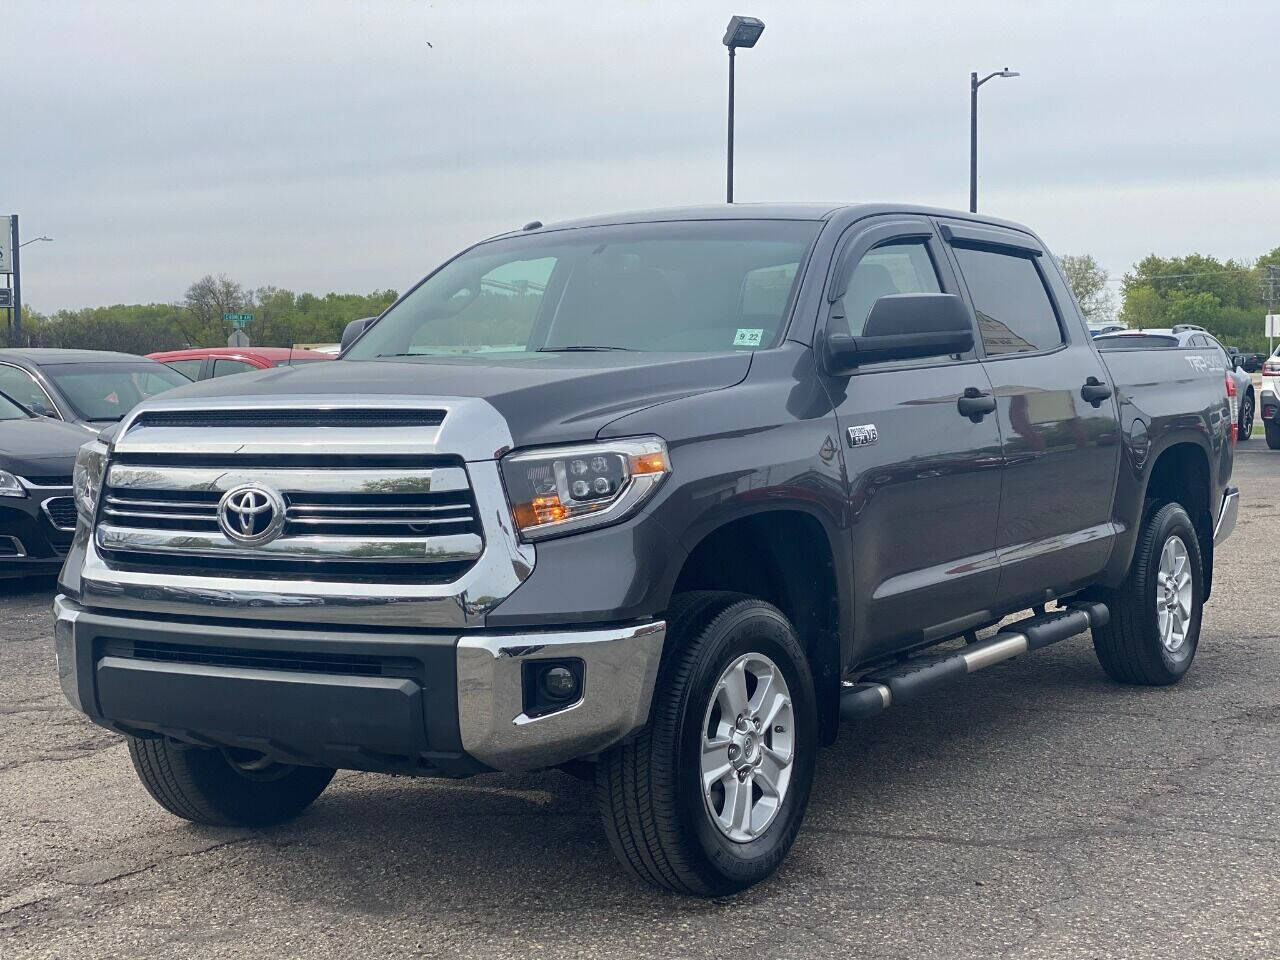 Used Toyota Tundra For Sale In Minnesota - Carsforsale.com®